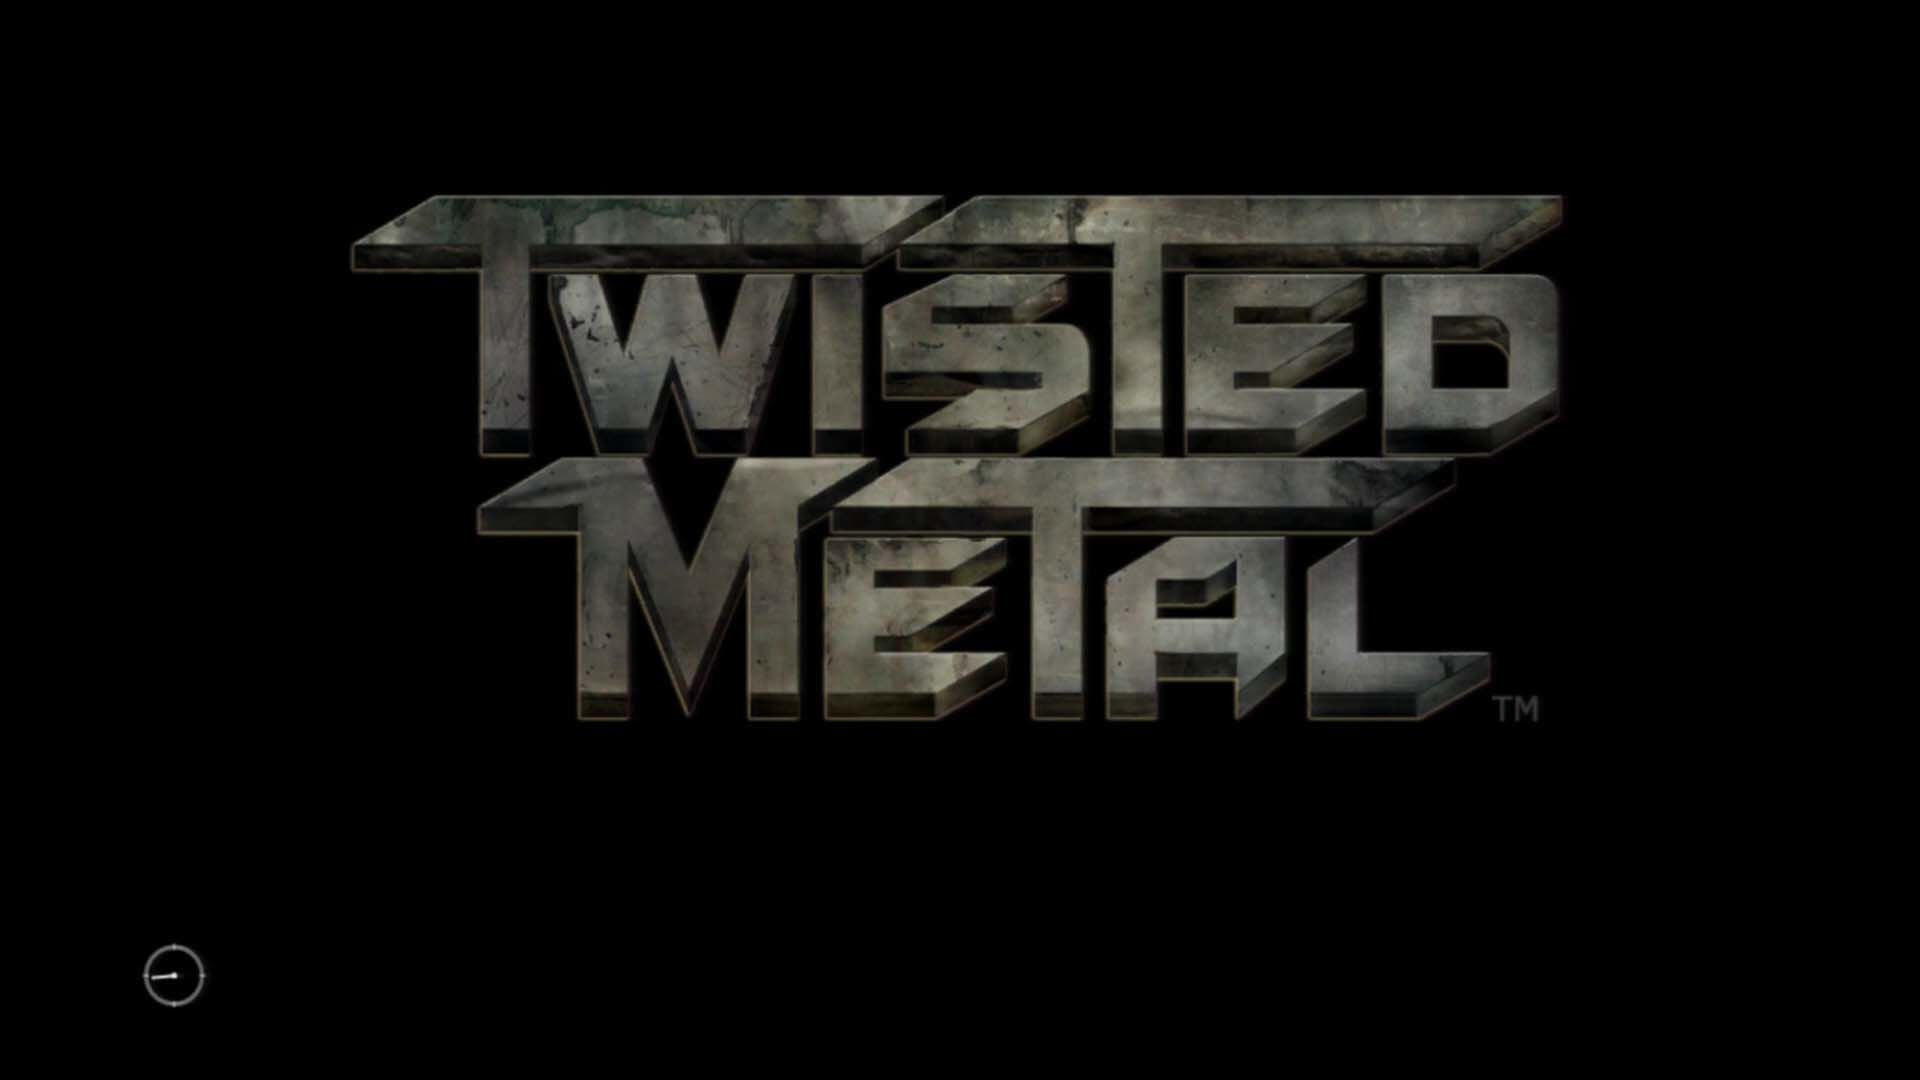 Twisted Metal - PlayStation 3 (PS3) Game